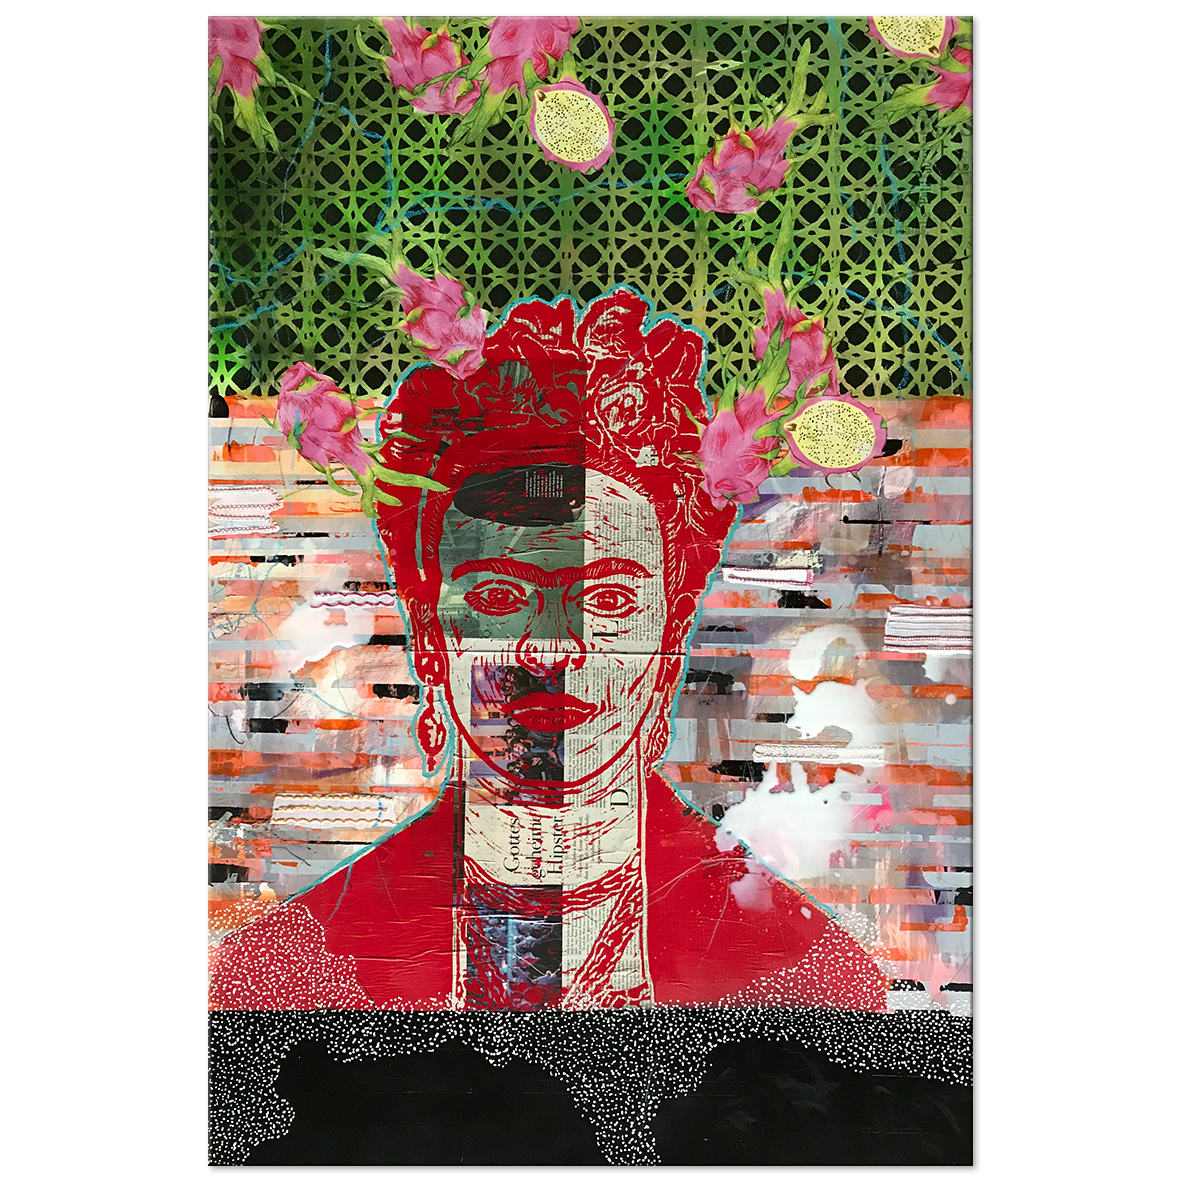 Mixed Media "Lookoing for Frida"